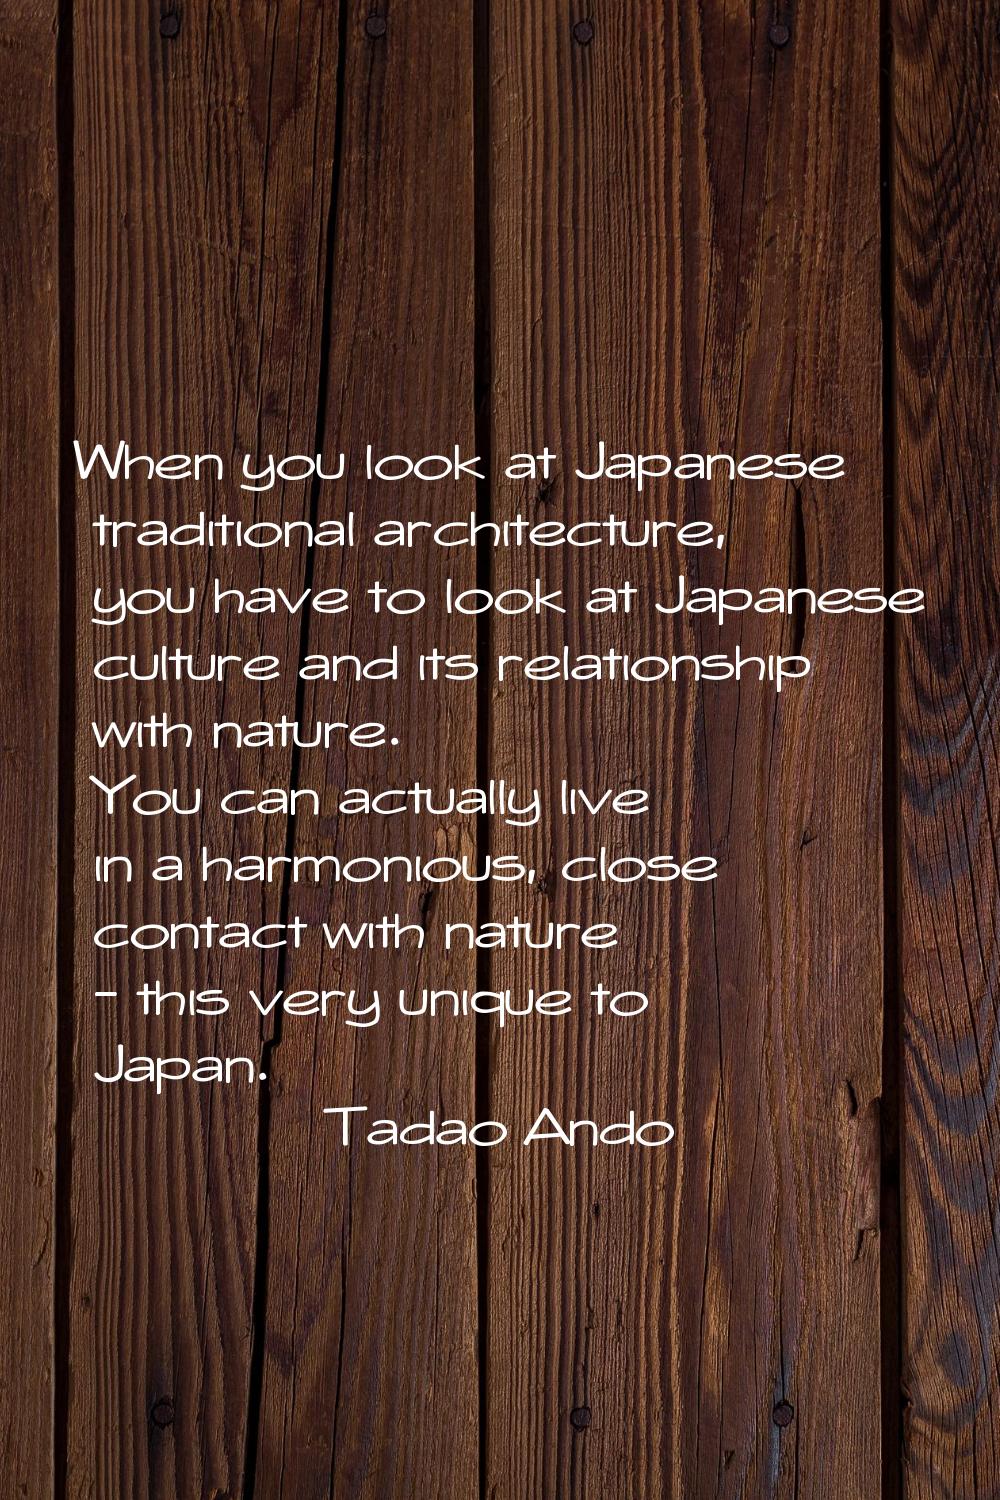 When you look at Japanese traditional architecture, you have to look at Japanese culture and its re